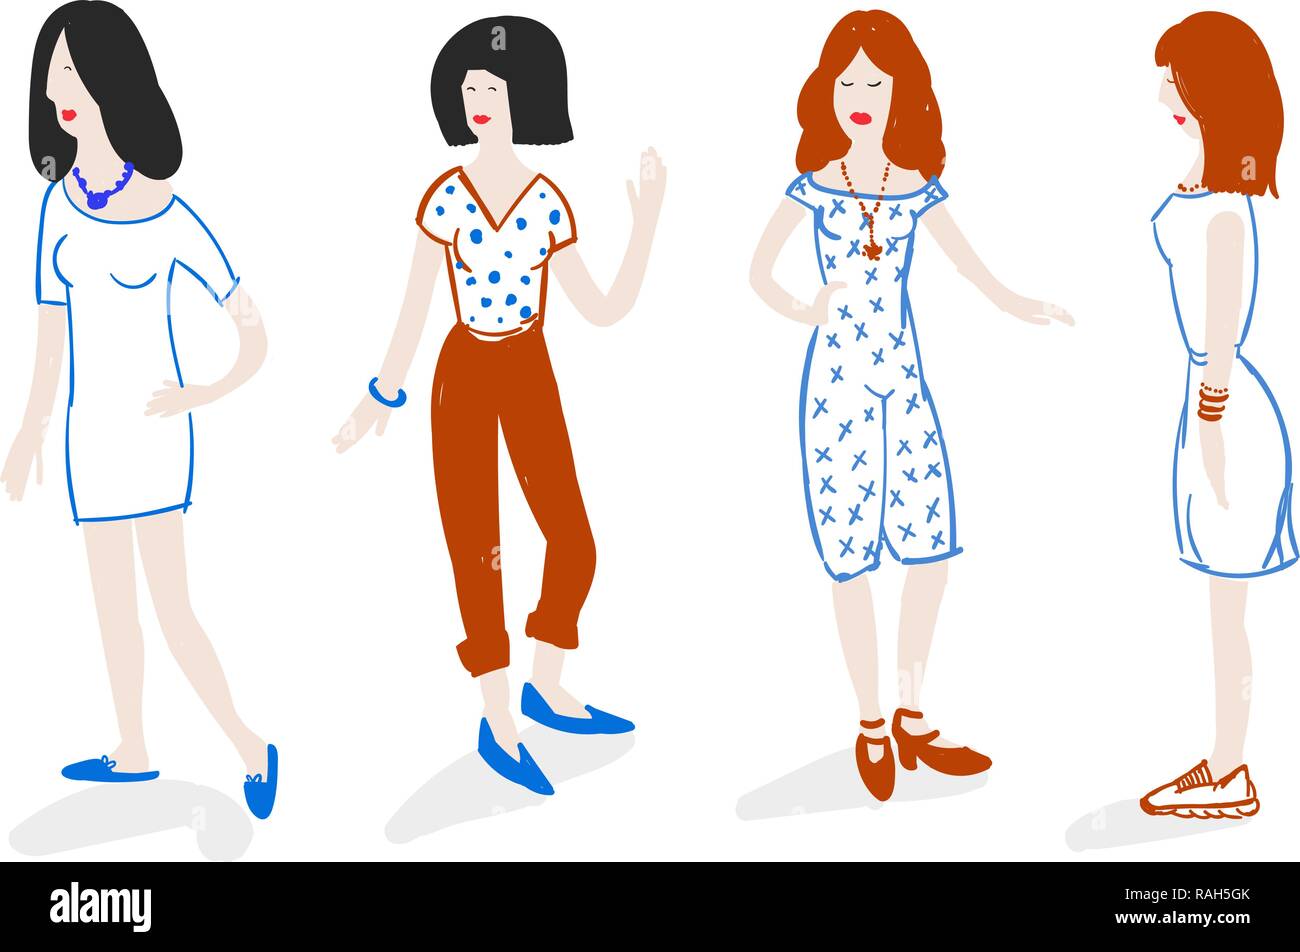 Group of fashionable girls standing doodle style Stock Vector